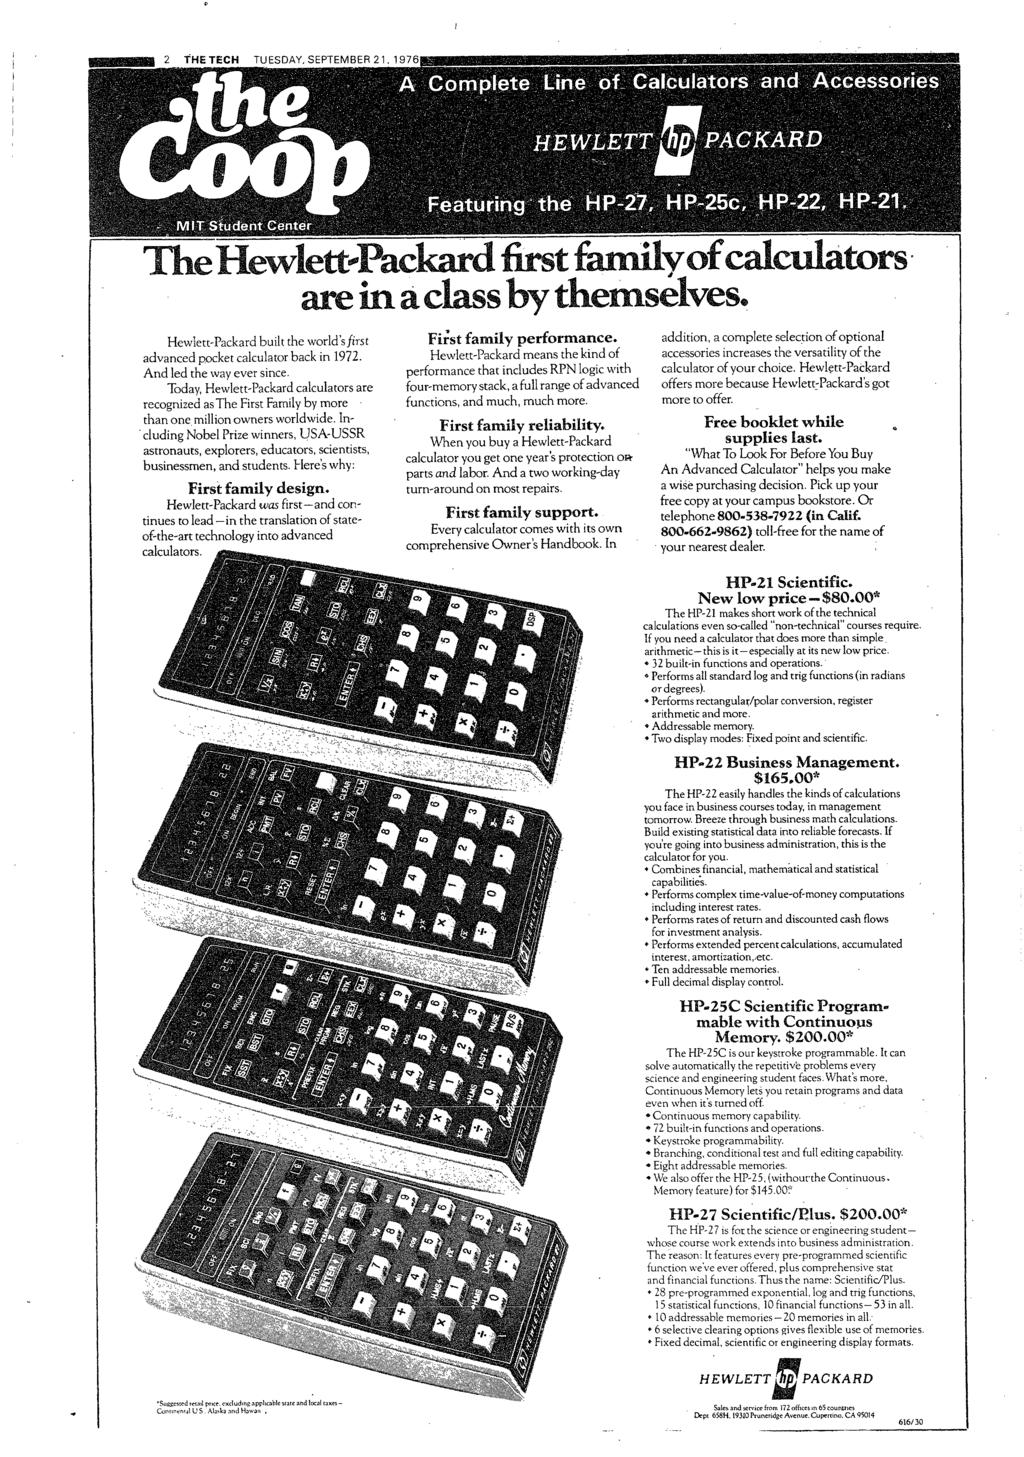 ! The~ewvlett PParar frst so are n aclass by tensh~e~lst. Hewlett-Packard bult the world's frst advanced pocket calculator back n 1972. And led the way ever snce.